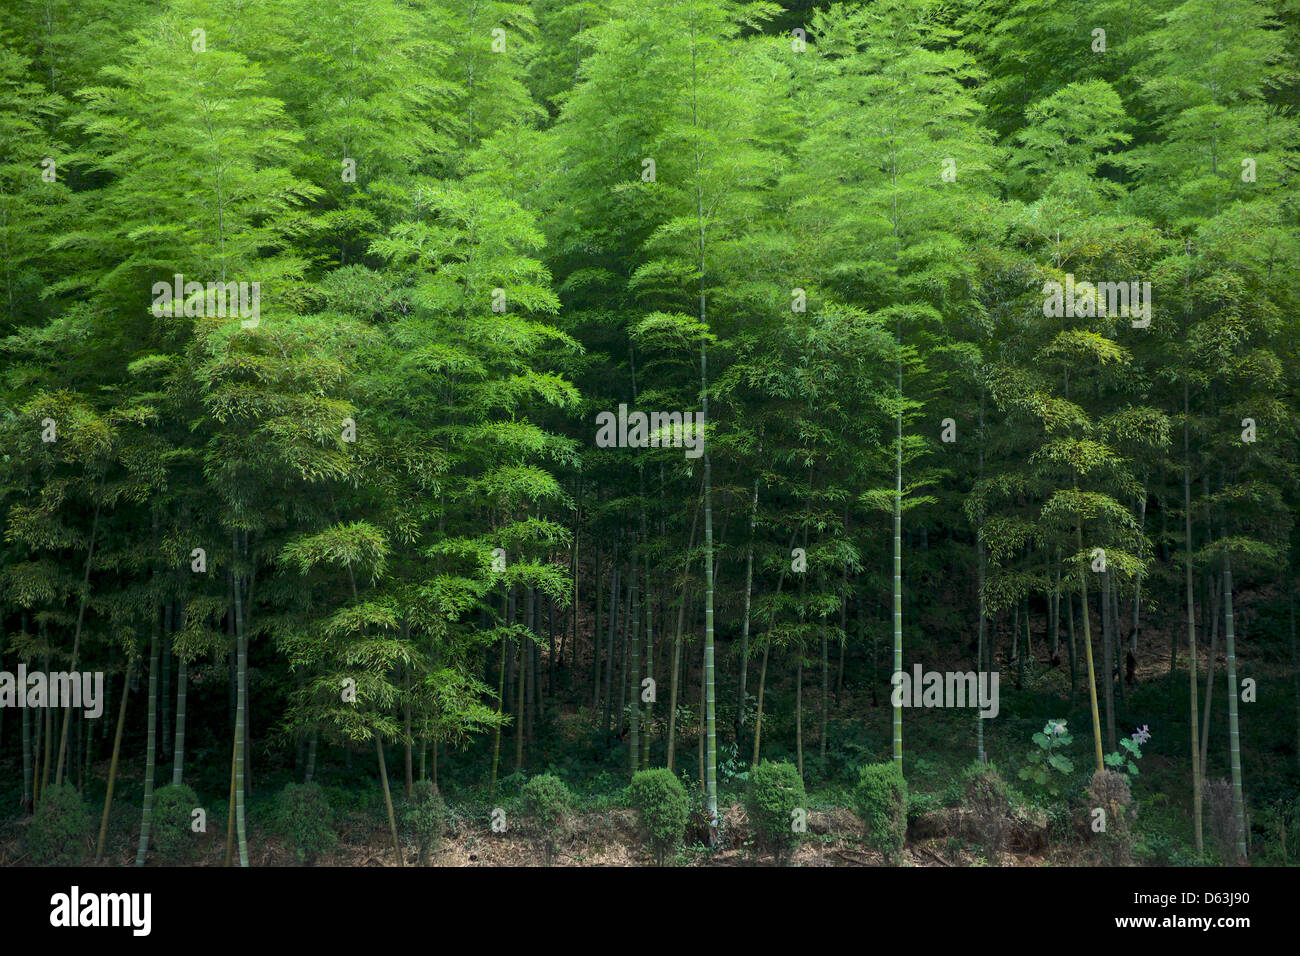 Bamboo forest in Anji. Anji county is well known for its bamboo, containing 60,000 hectares of bamboo groves Stock Photo